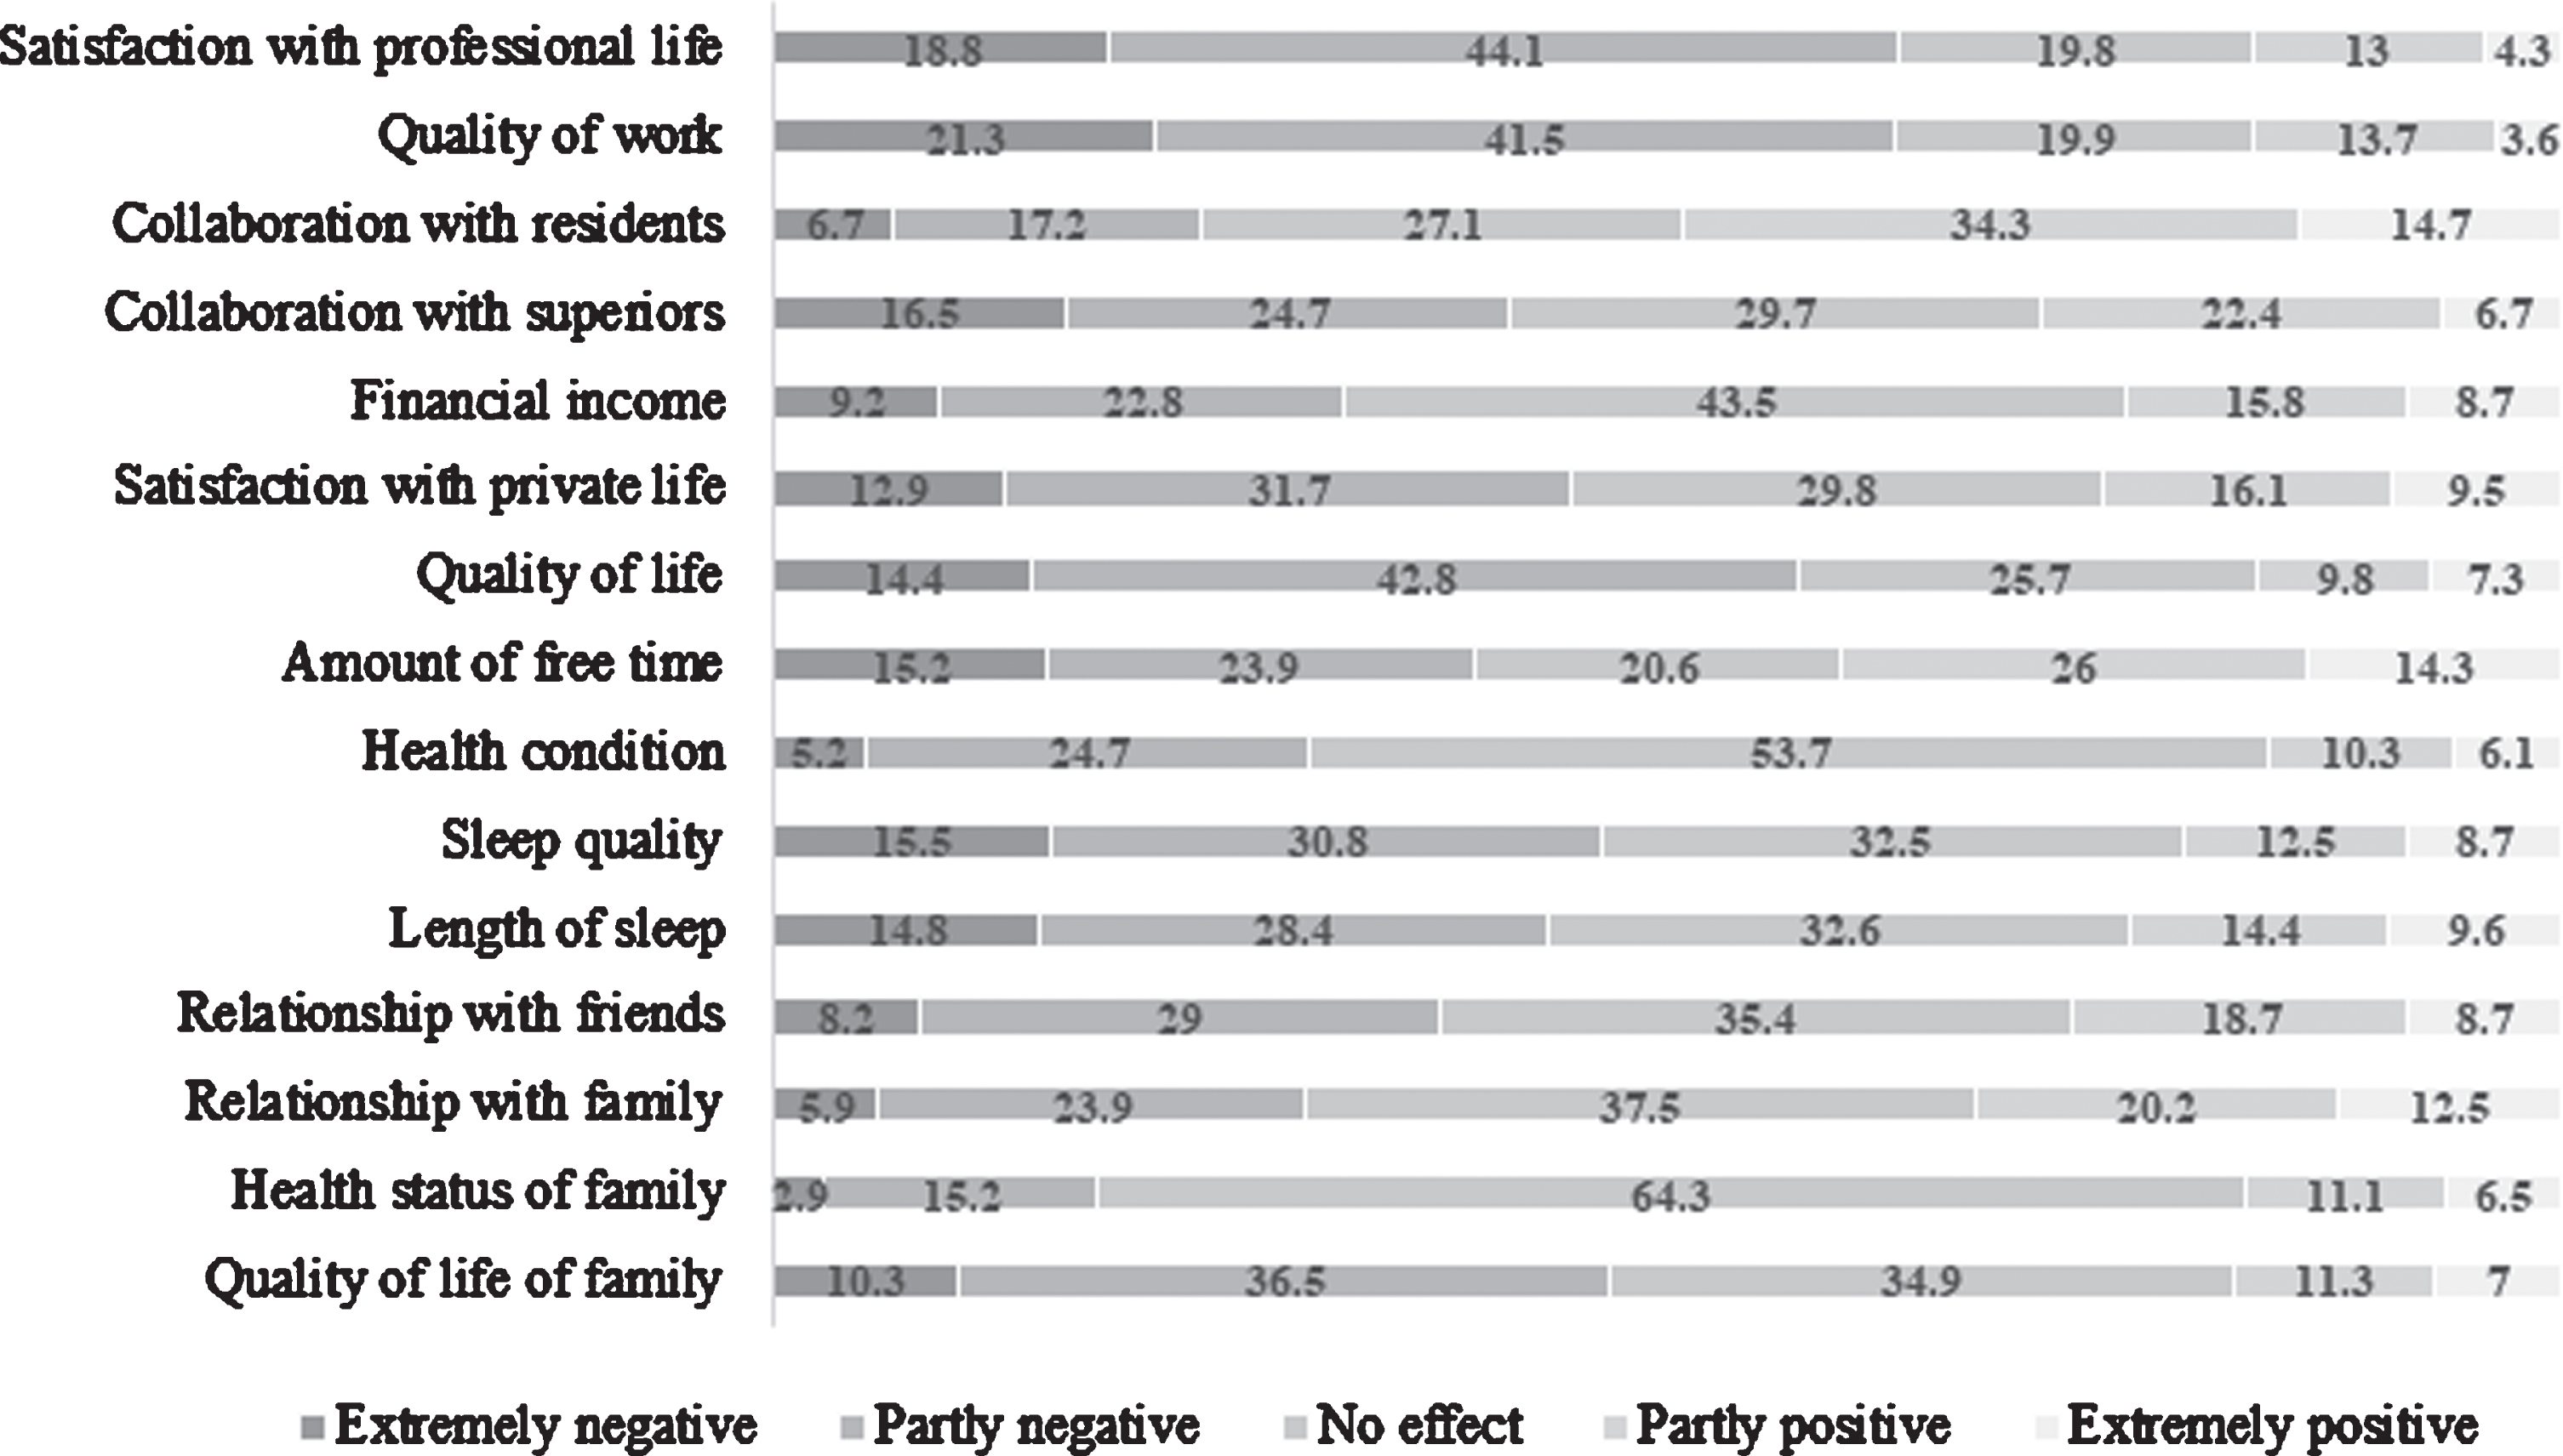 Impact of the COVID-19 pandemic on professional and personal lives of residents and their families (residents indicated in what extend work during COVID-19 pandemic affected them compared to before, reported as percentage, N = 728).